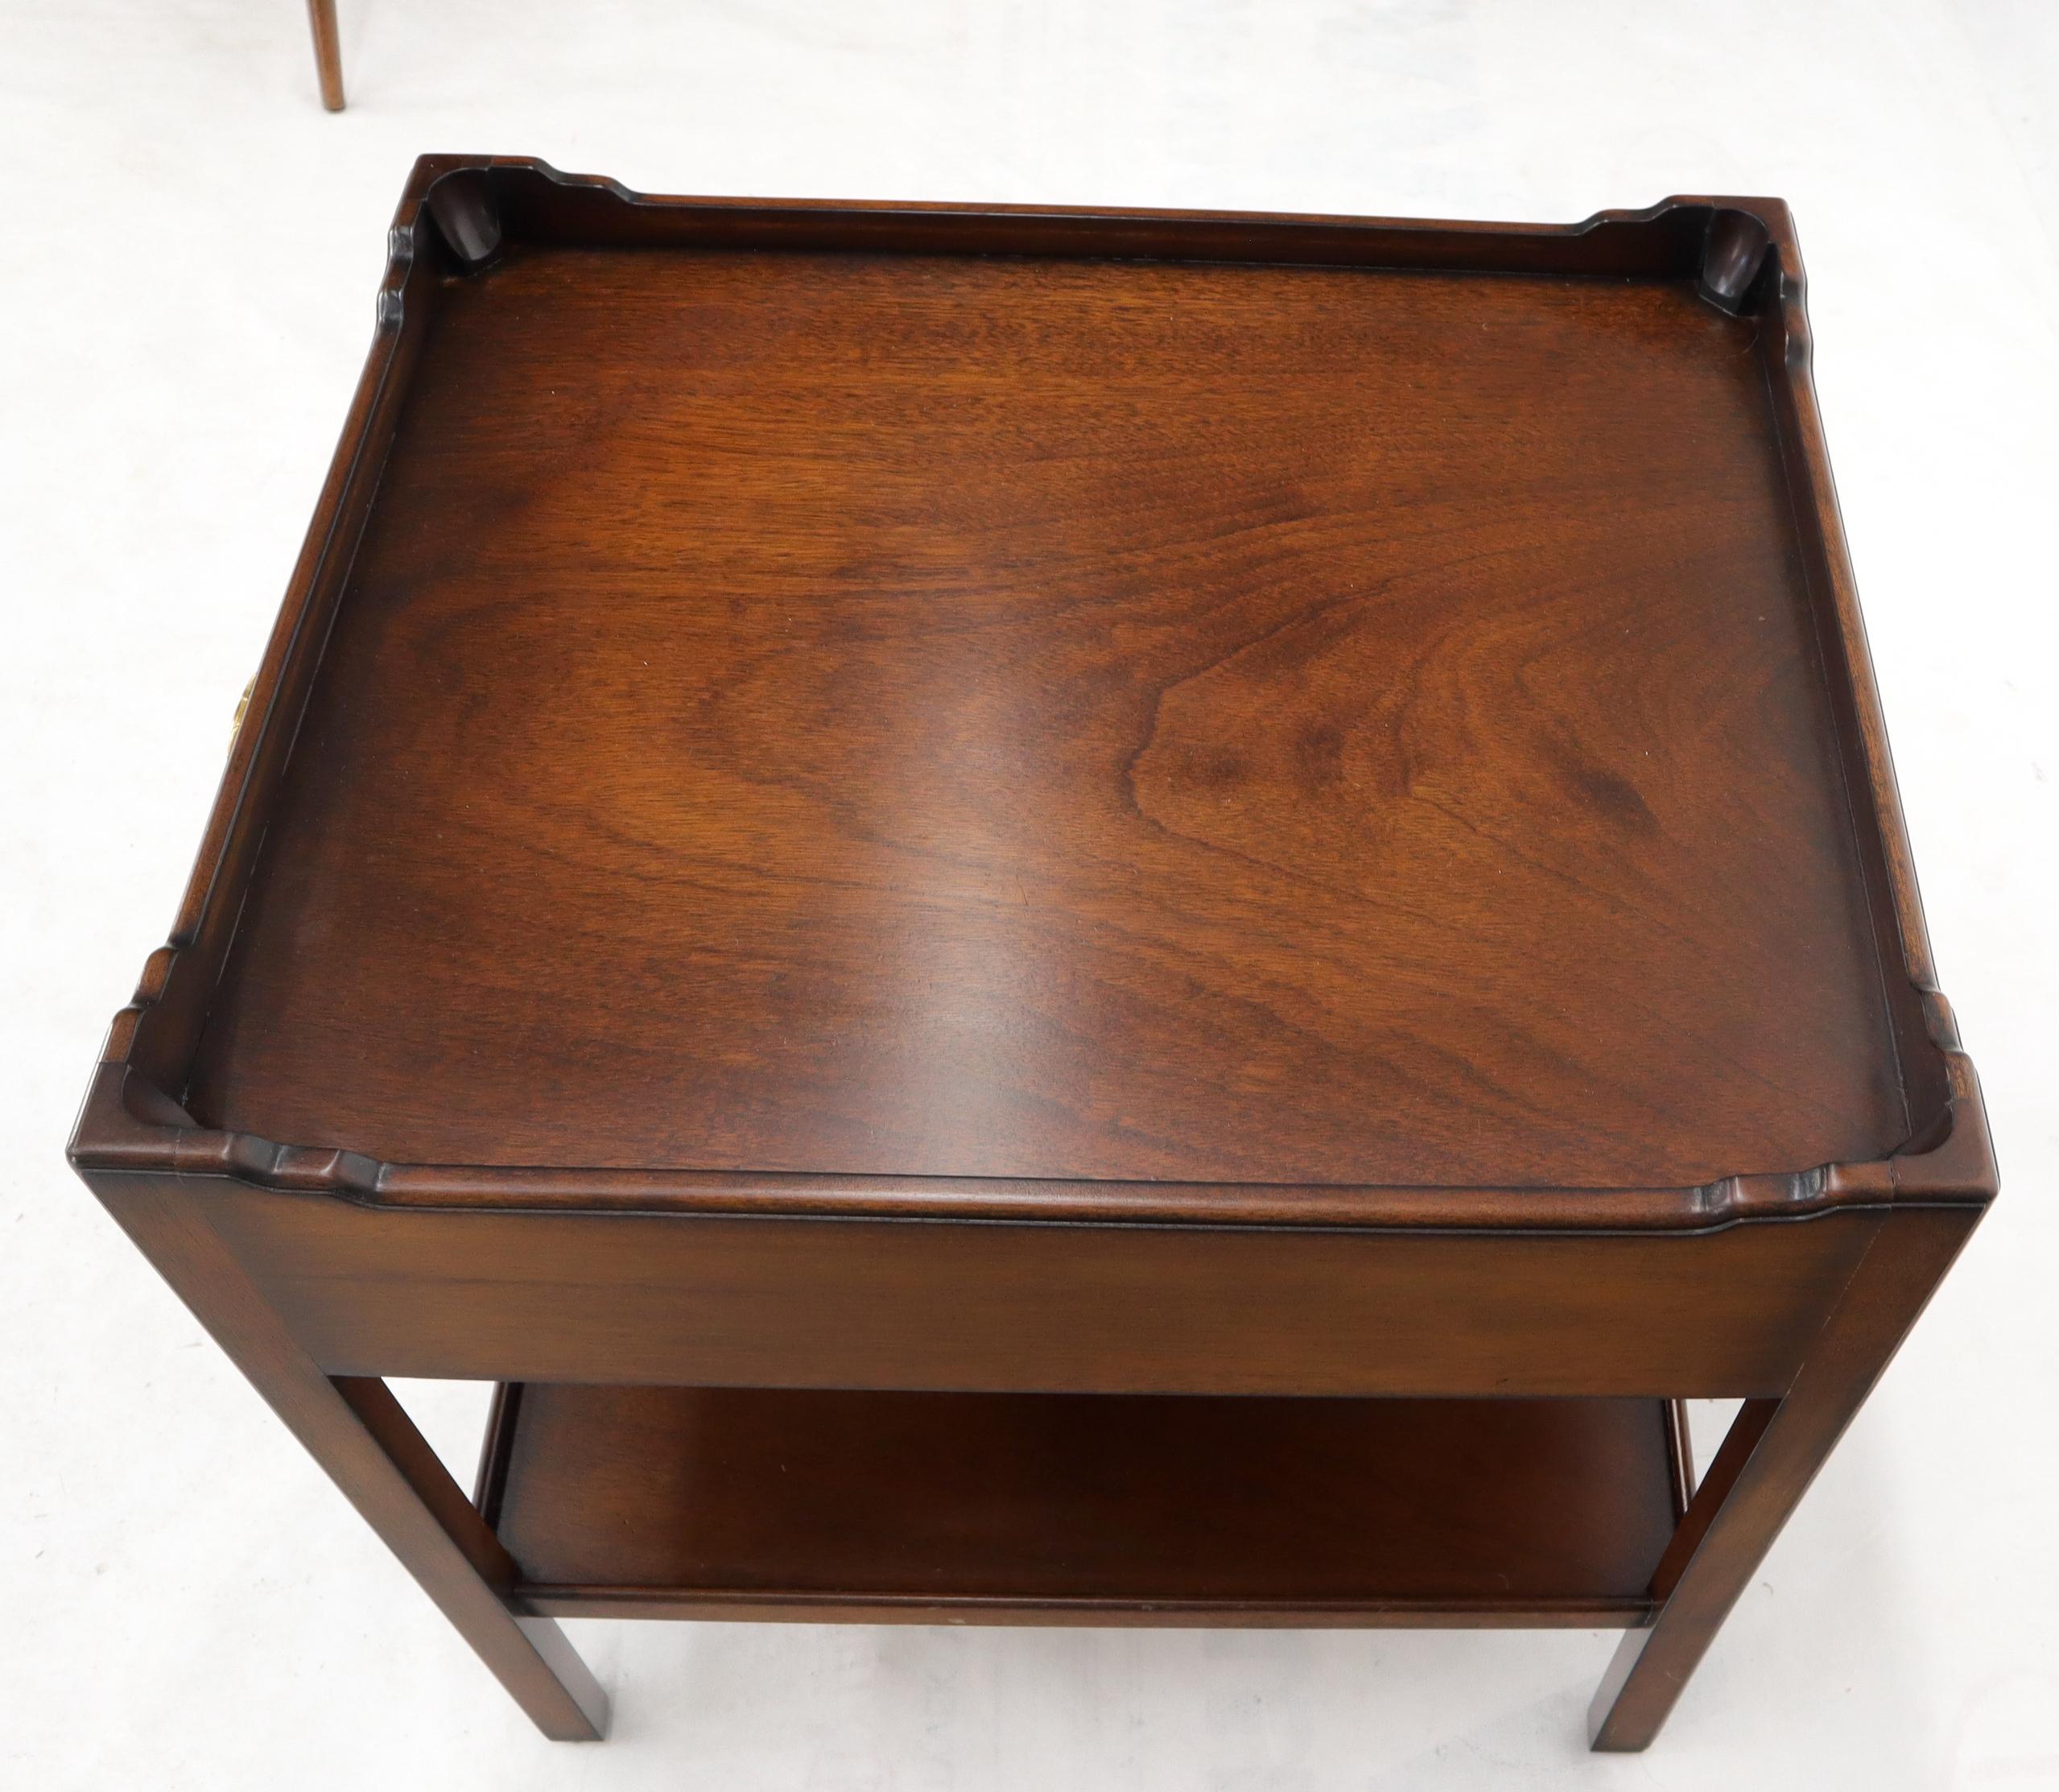 Southampton Mahogany Gallery Top Brass Drop Pull One-Drawer End Table Stand In Excellent Condition For Sale In Rockaway, NJ